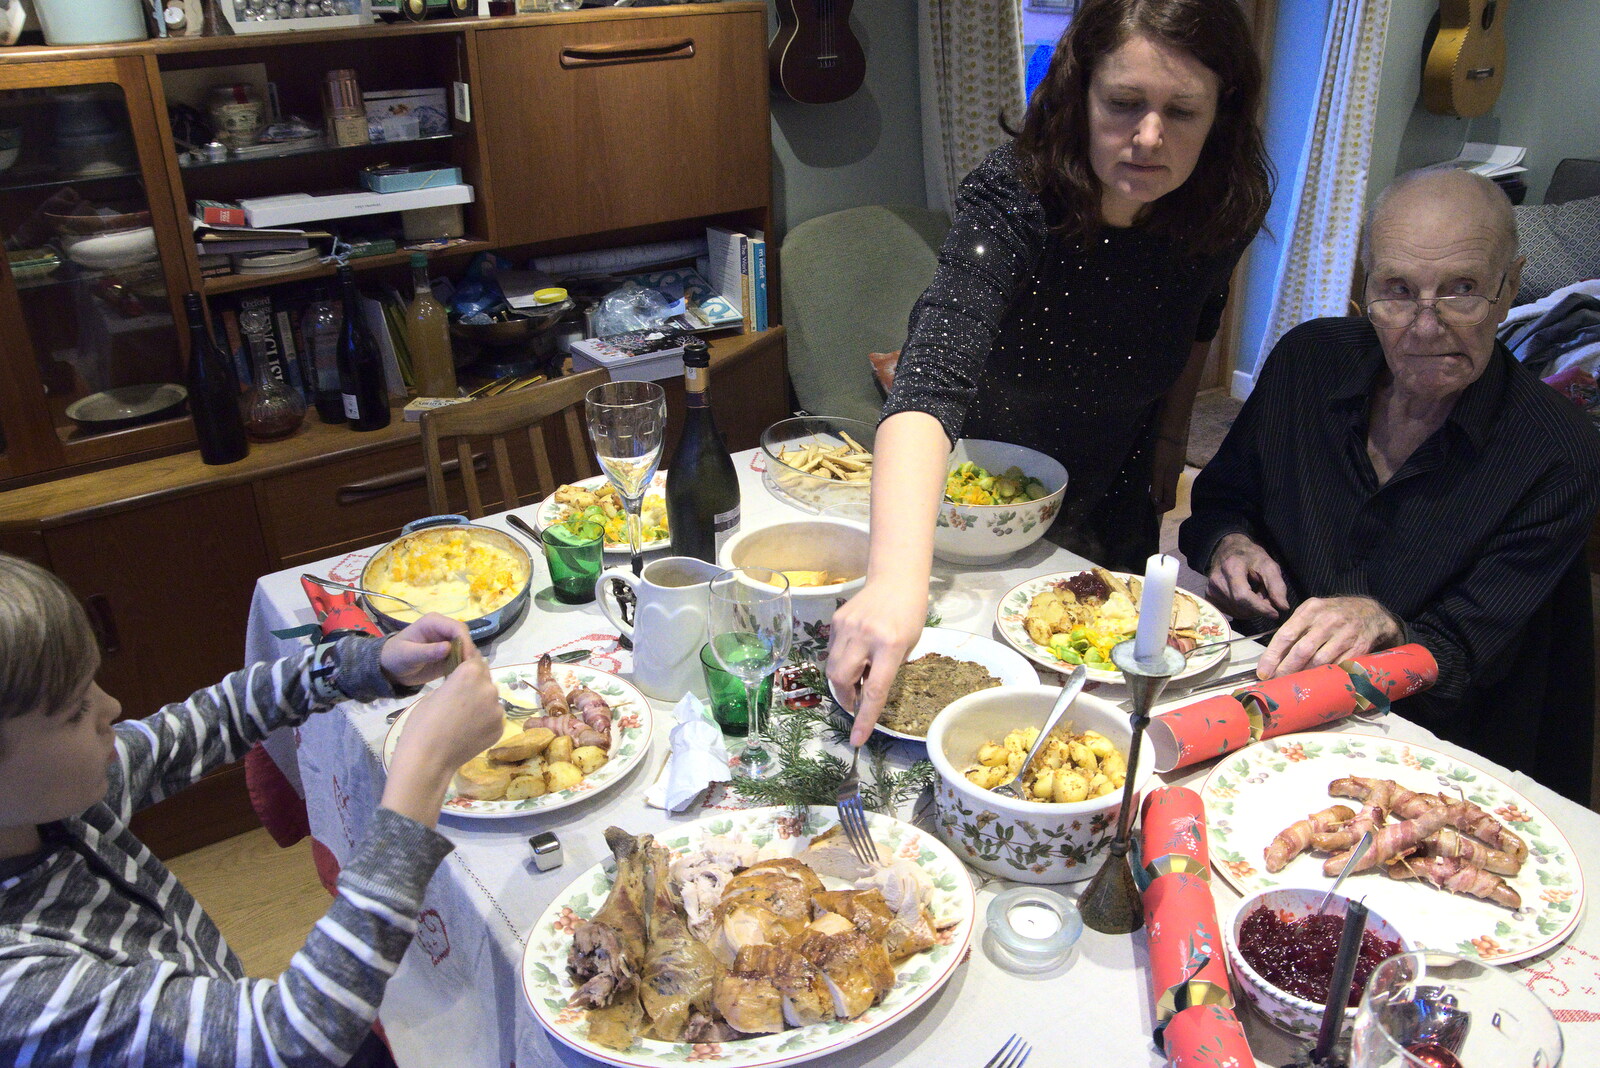 Christmas dinner occurs from Christmas Day at Home, Brome, Suffolk - 25th December 2021